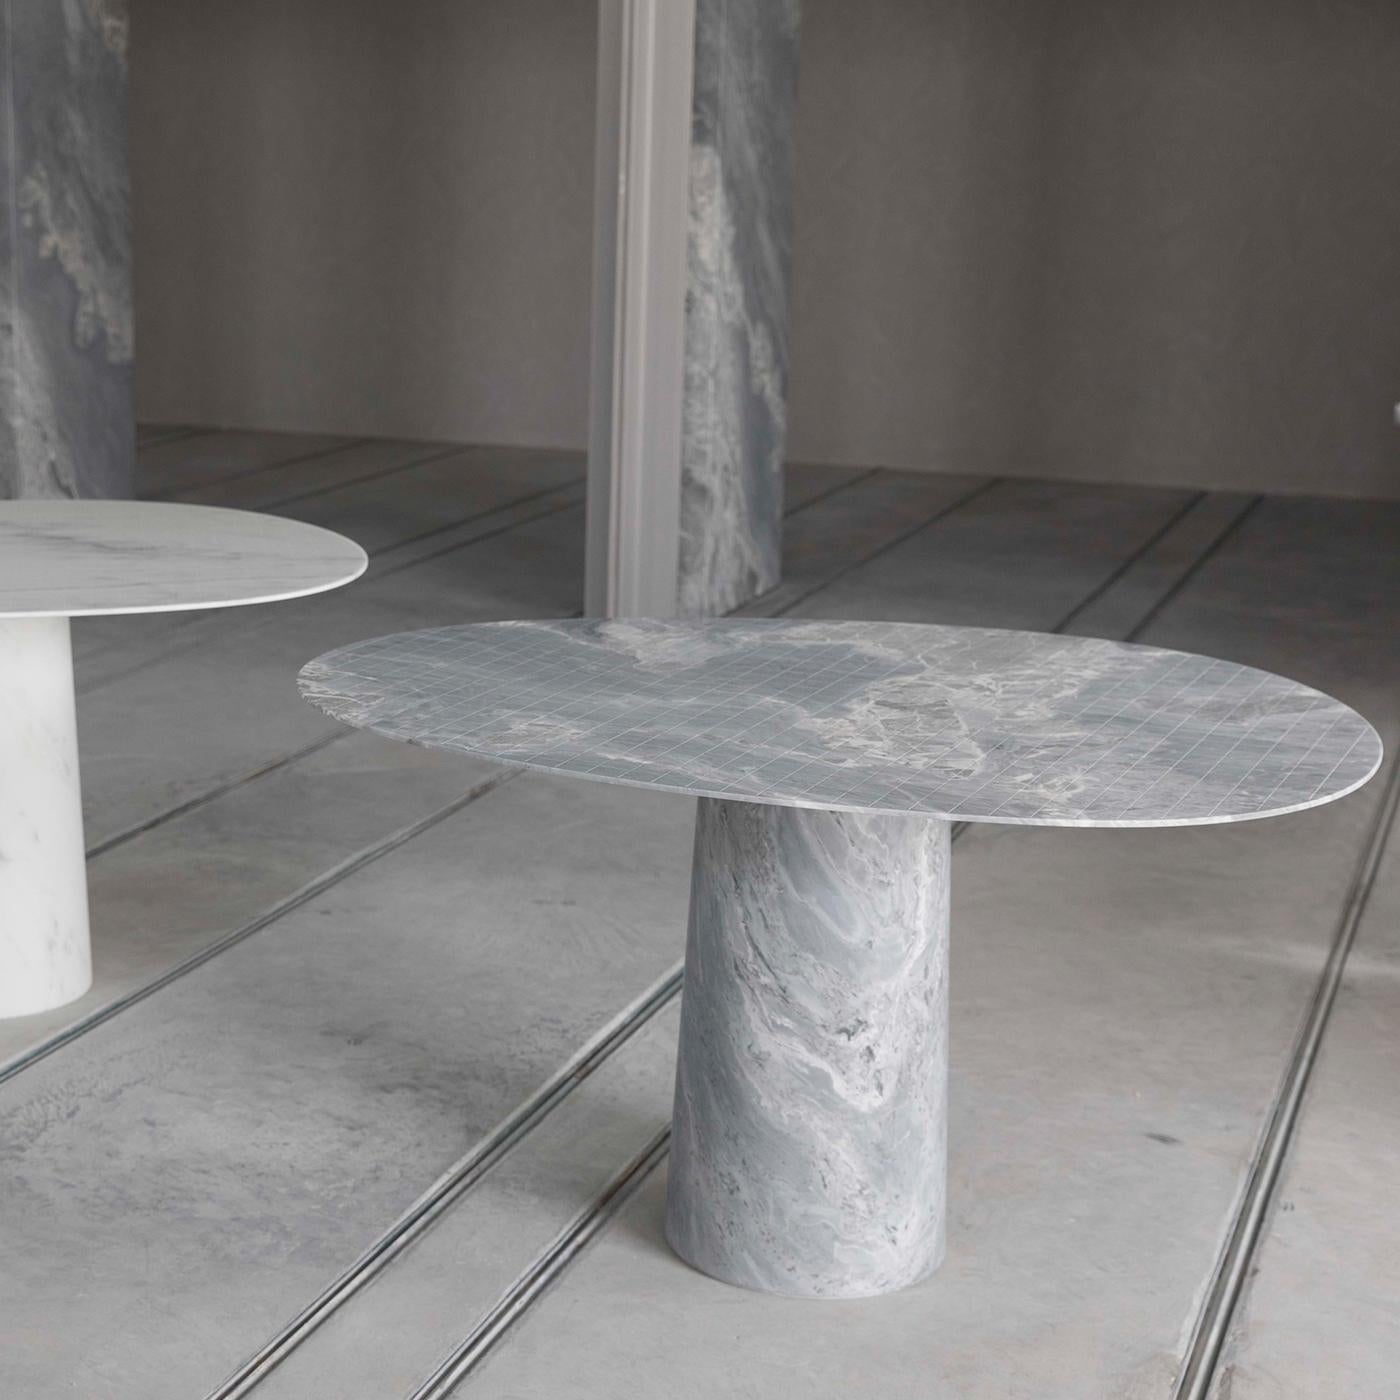 This majestic table fashioned of first-rate Versilys marble in its versatile gray variant has as primary goal to showcase the natural allure of the precious stone, its bright tone only interrupted by the delicate veinings that make it entirely